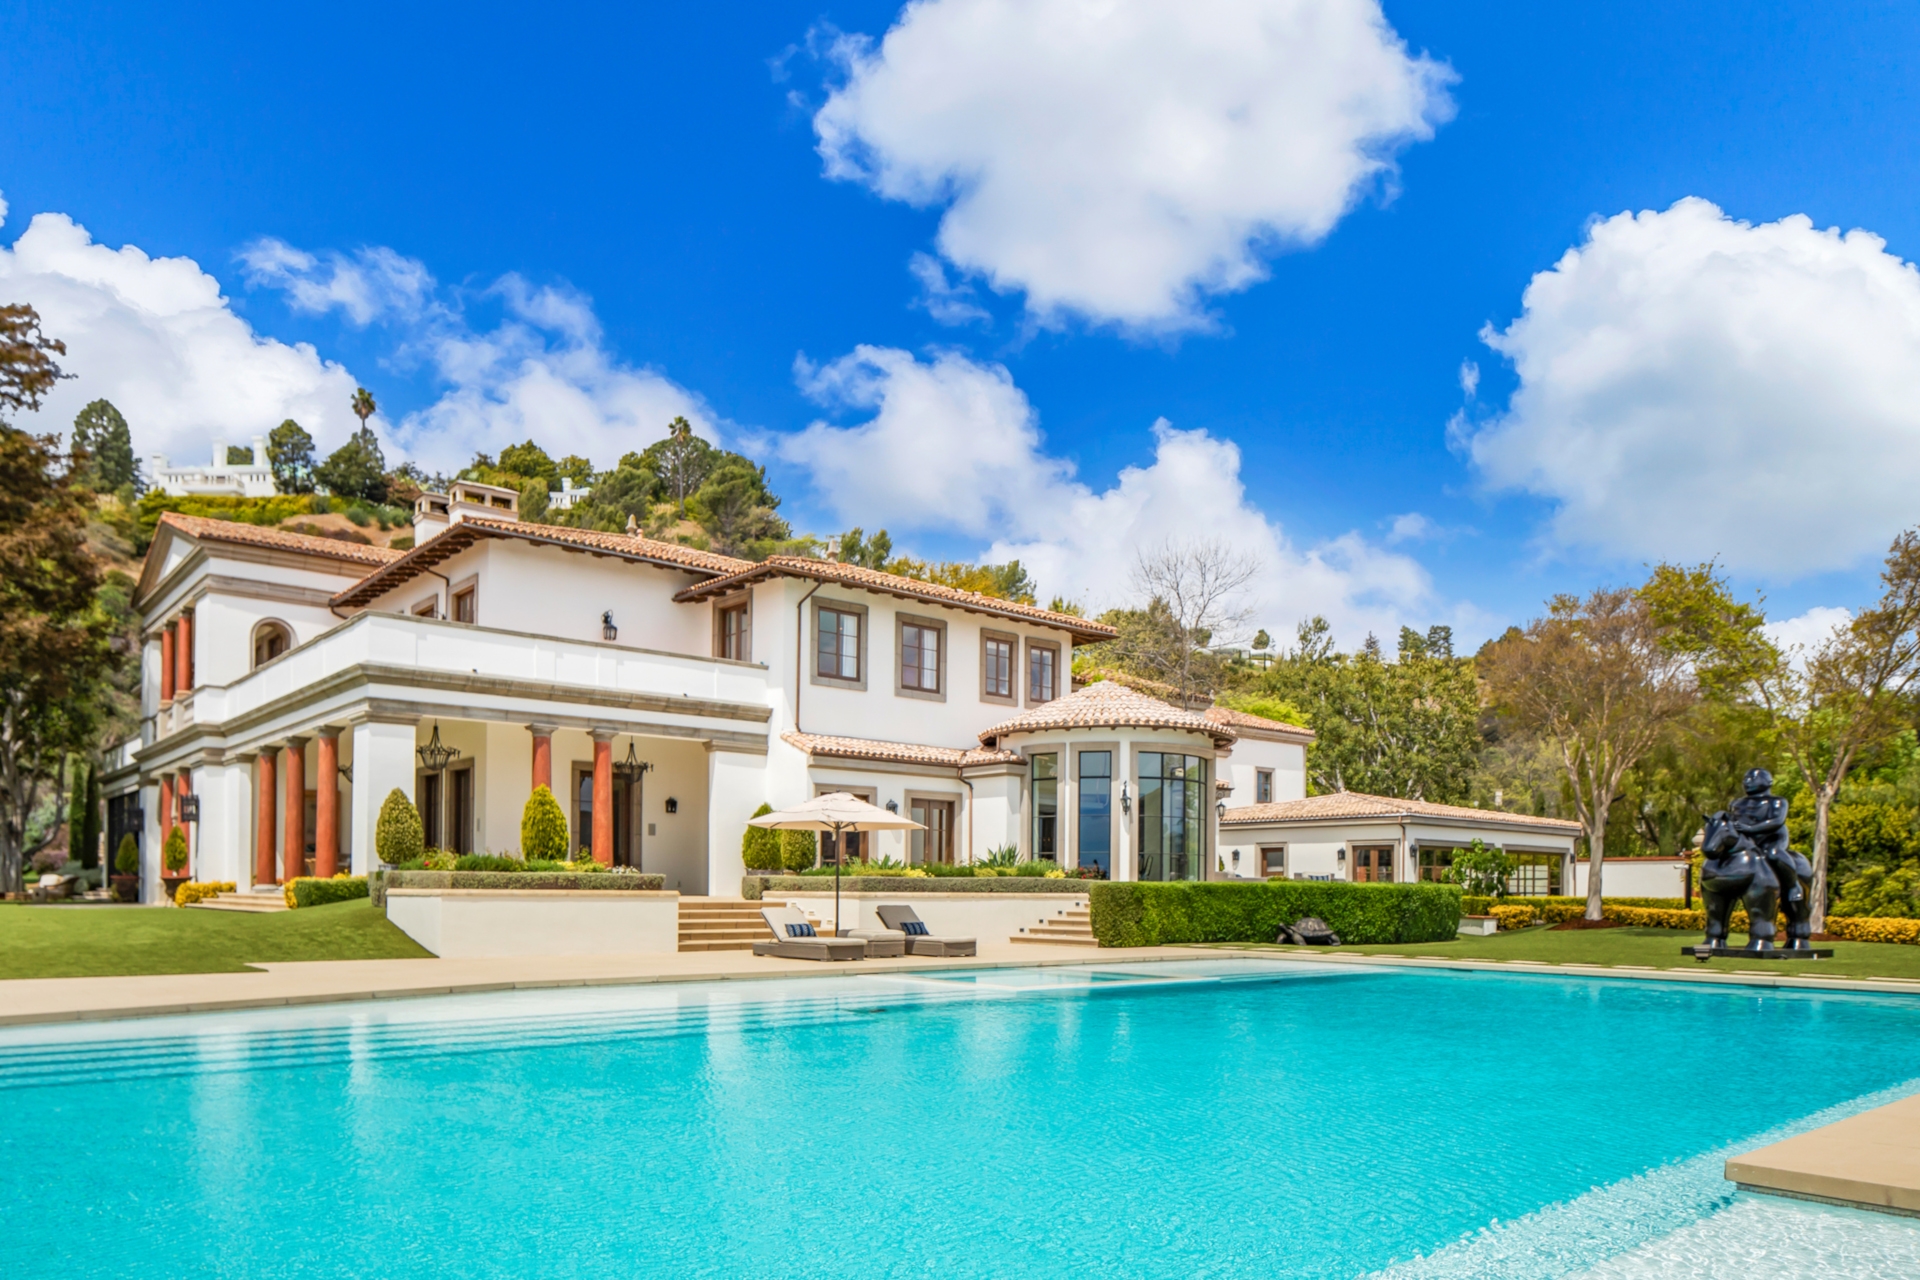 Sylvester Stallone’s Beverly Hills Mansion is Up For Sale